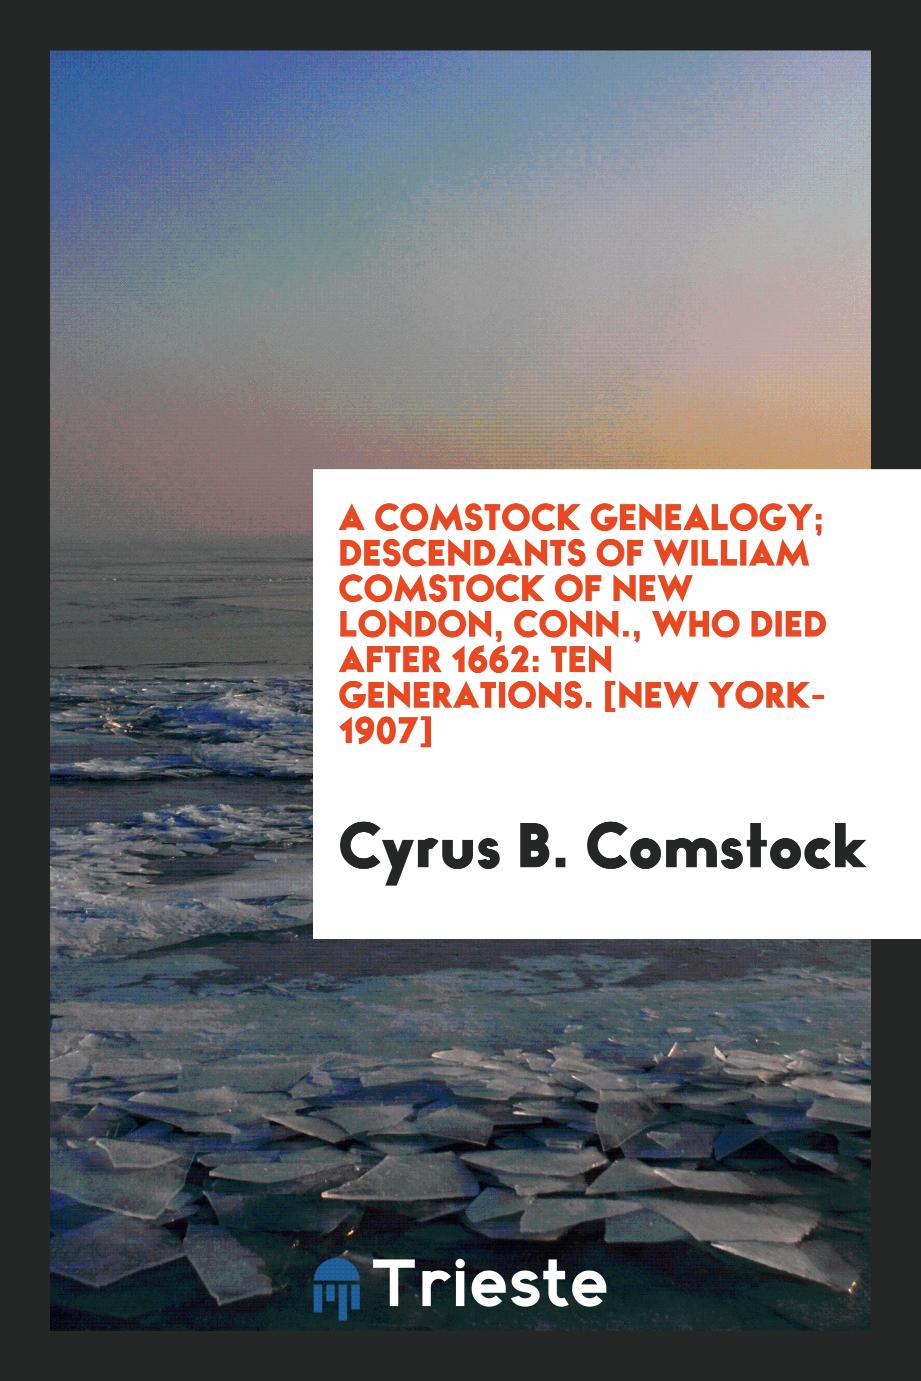 A Comstock Genealogy; Descendants of William Comstock of New London, Conn., Who Died After 1662: Ten Generations. [New York-1907]